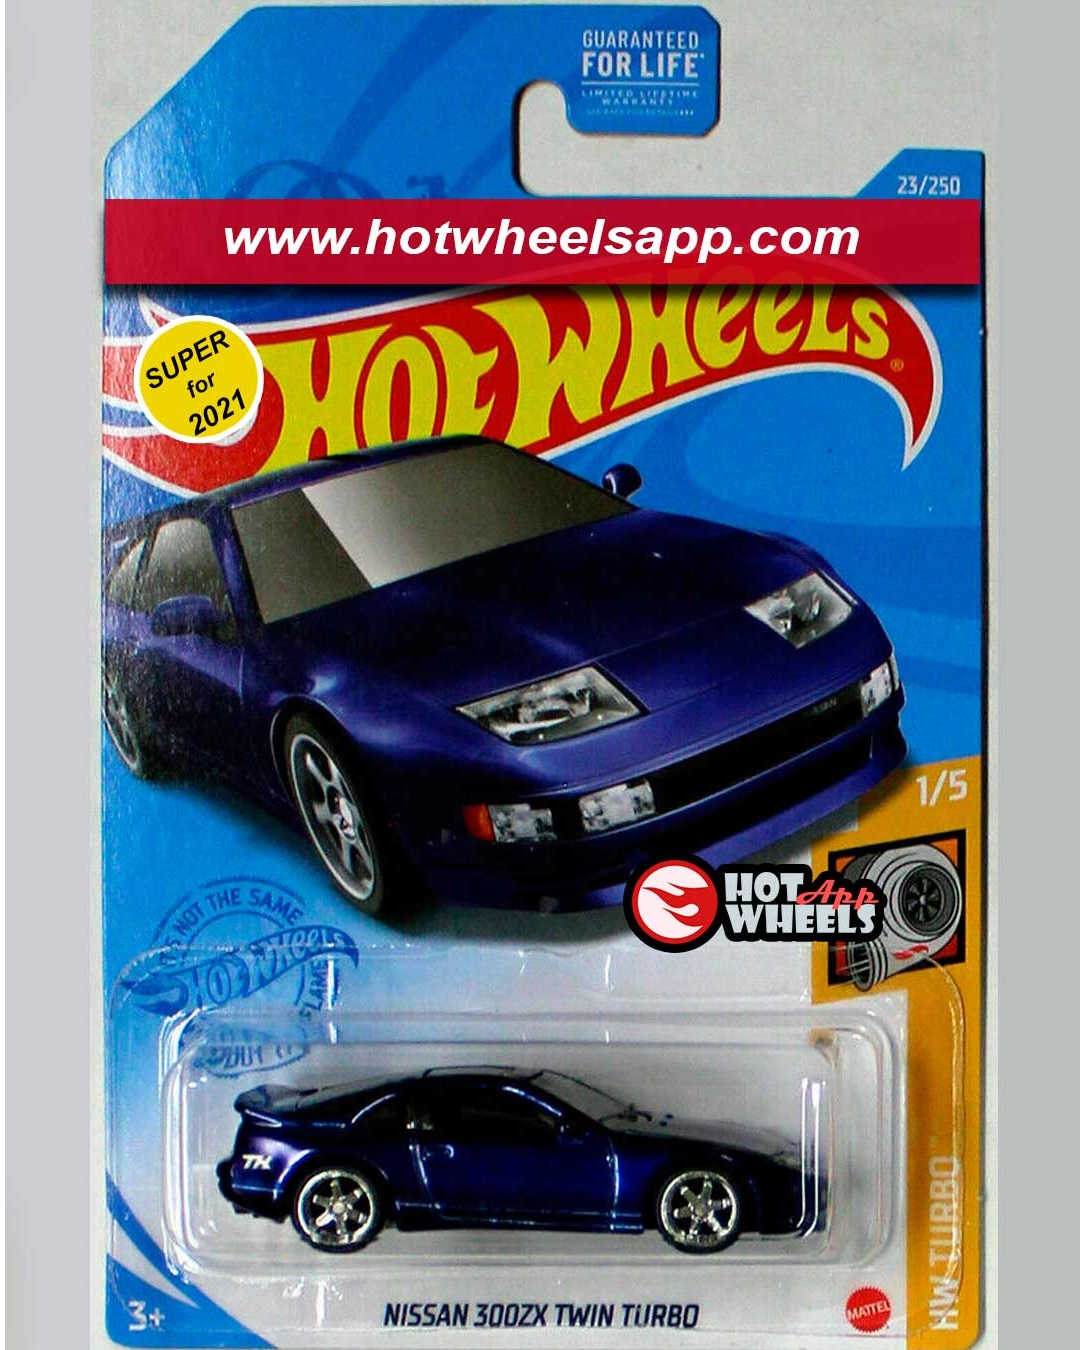 HOT WHEELS 2019 #110/250 NISSAN 300ZX Twin Turbo Rosso @ K Nuovo Casting 